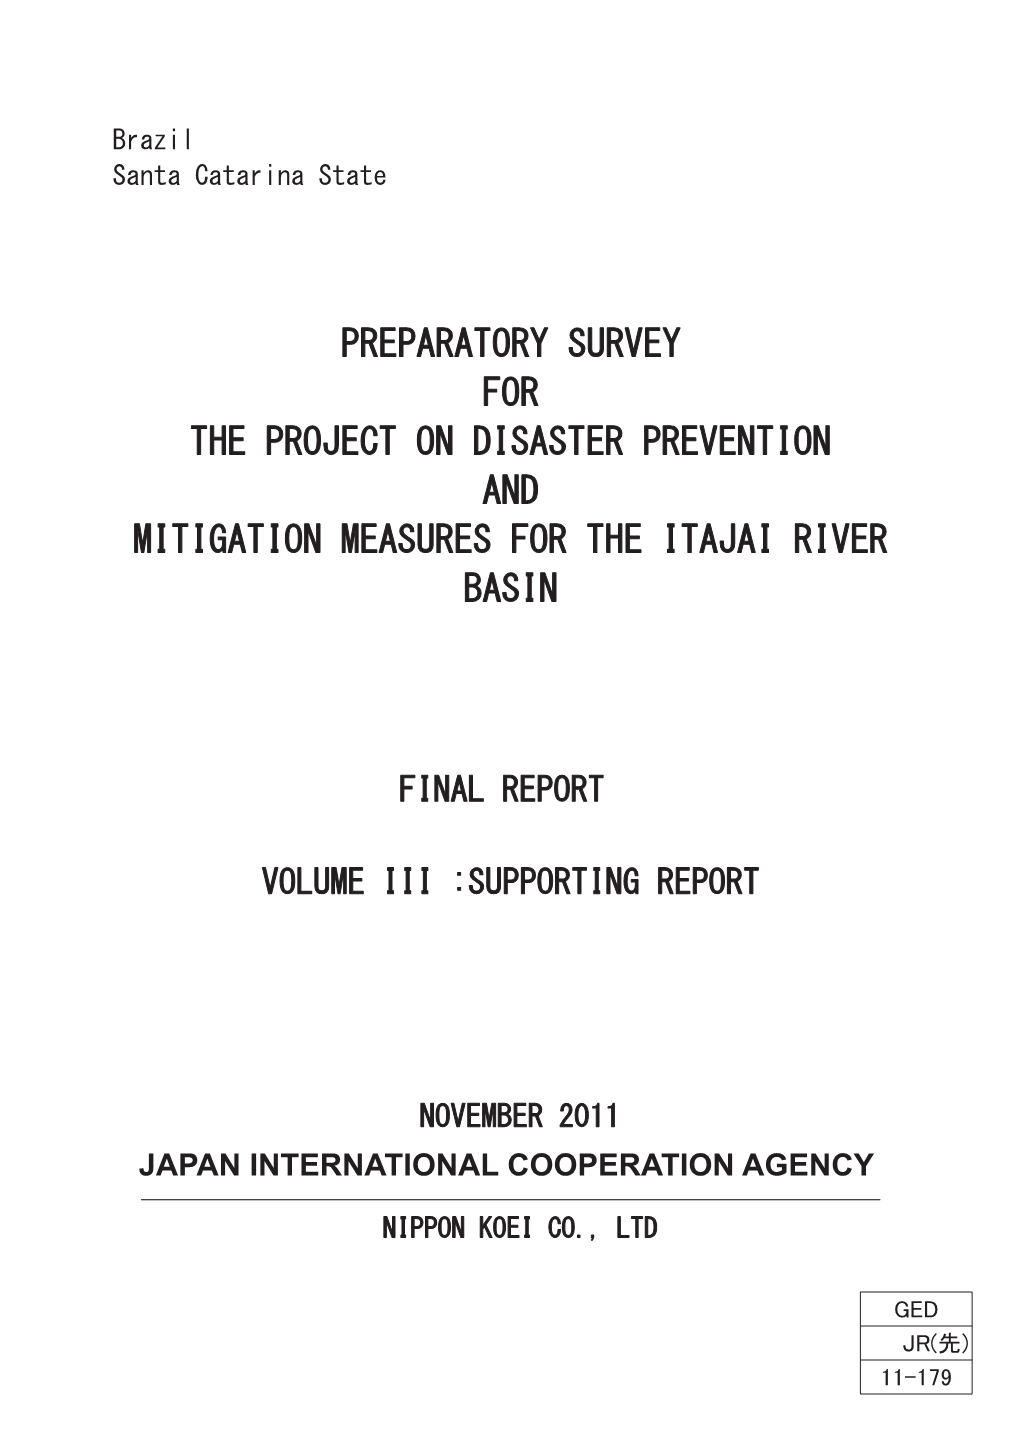 Preparatory Survey for the Project on Disaster Prevention and Mitigation Measures for the Itajai River Basin